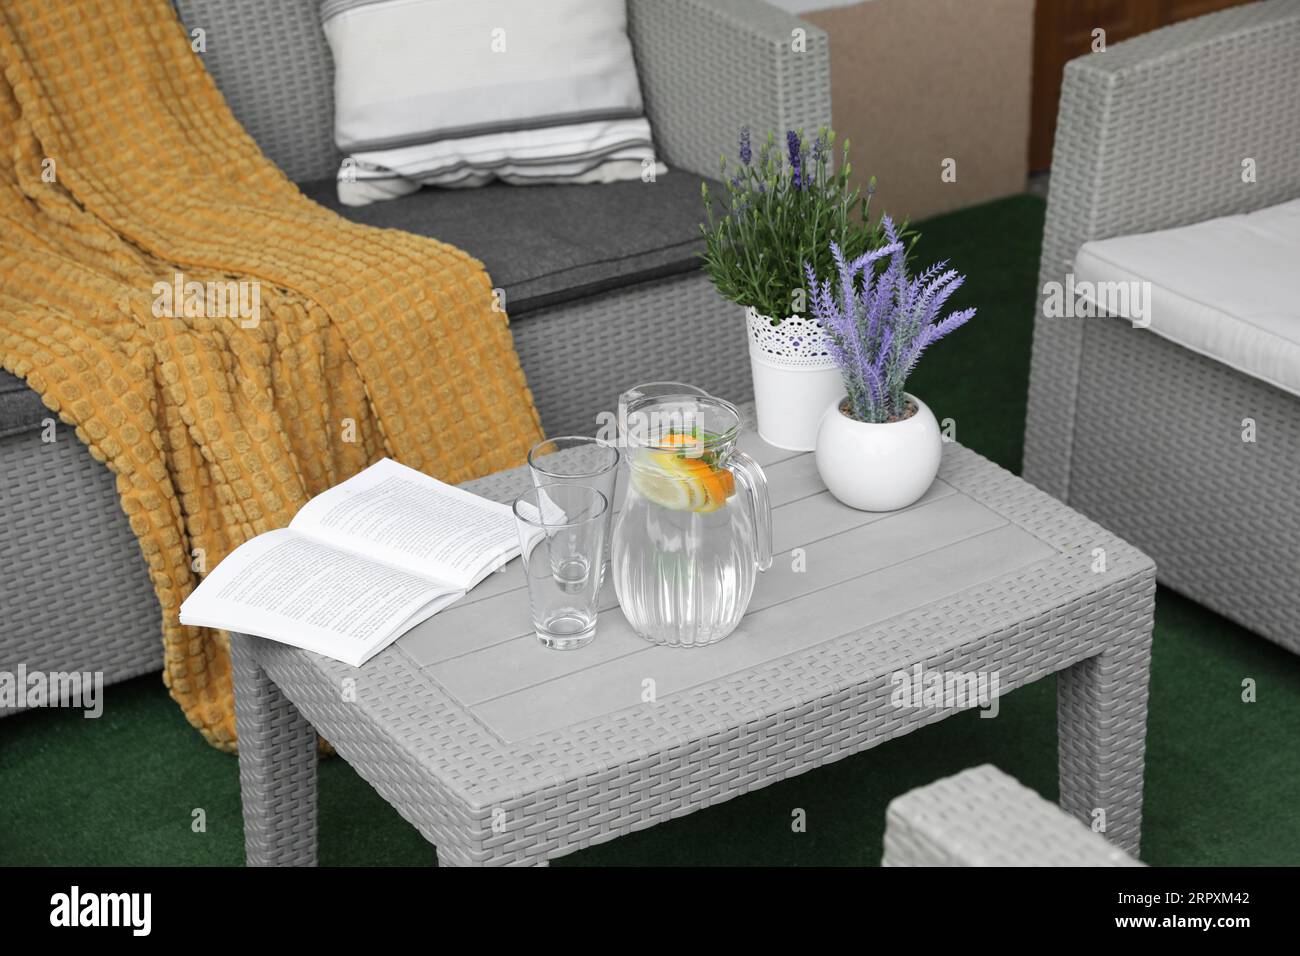 Table with book, jug of water and potted plants in front of sofa on outdoor terrace Stock Photo